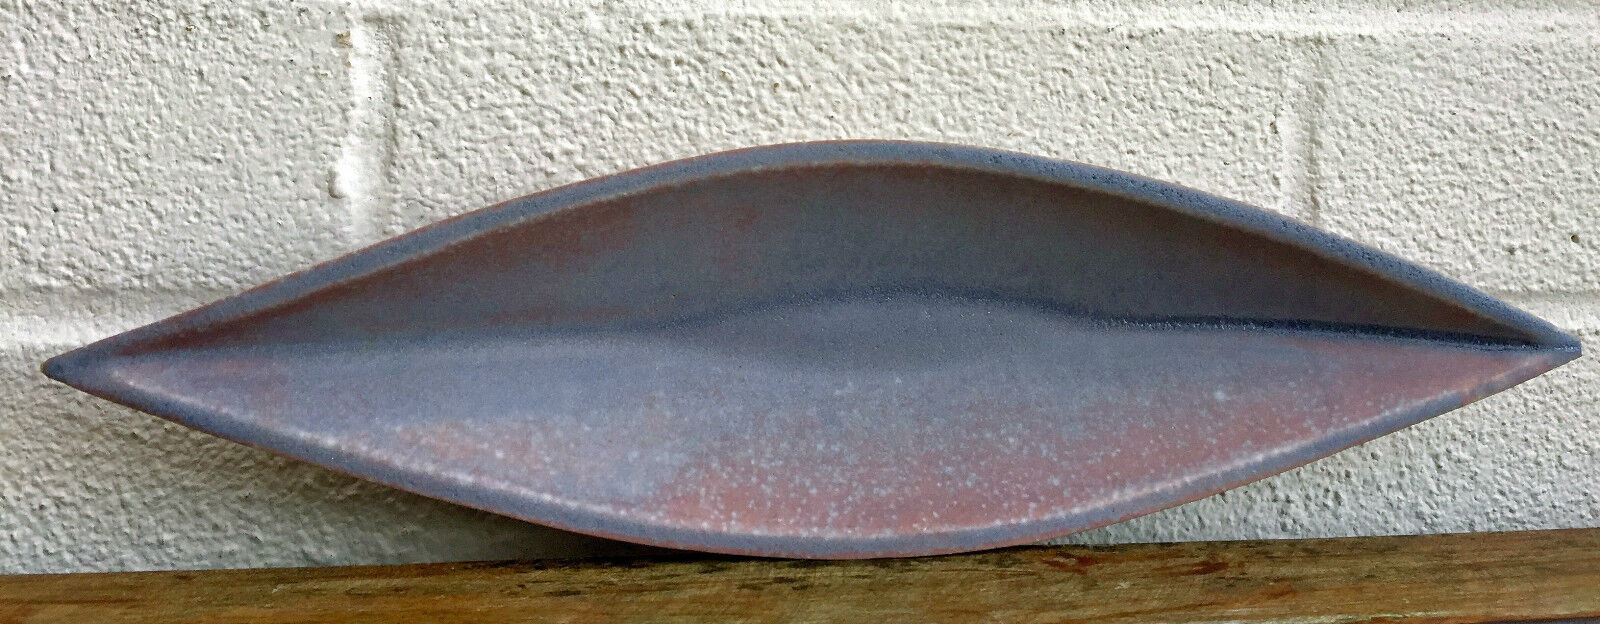 EMILY MYERS - STUDIO POTTERY BOAT SHAPE BOWL DISH -ART IN ACTION 1992 EXHIBITION?